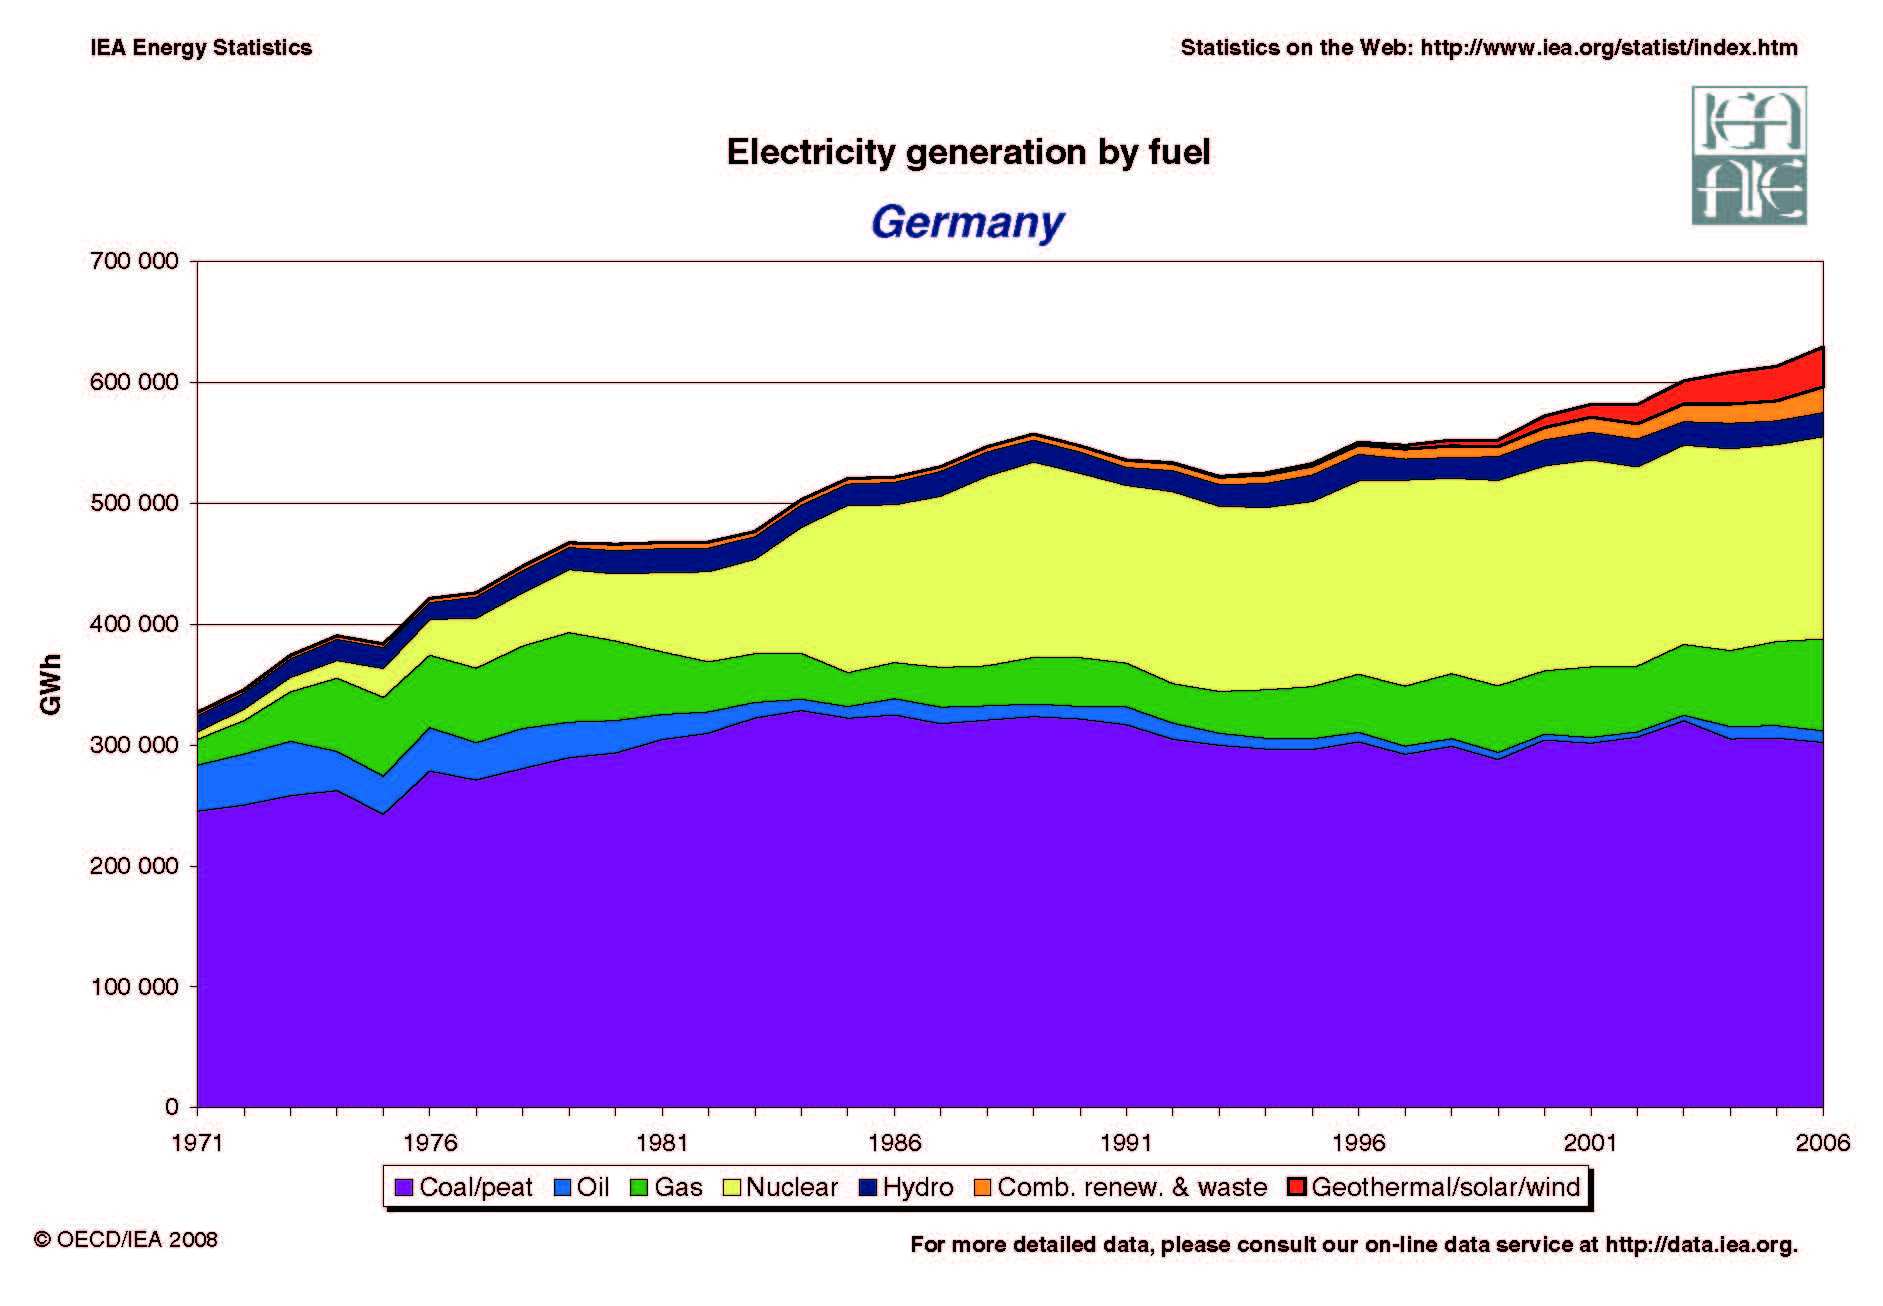 Electricity generation by fuel - Germany